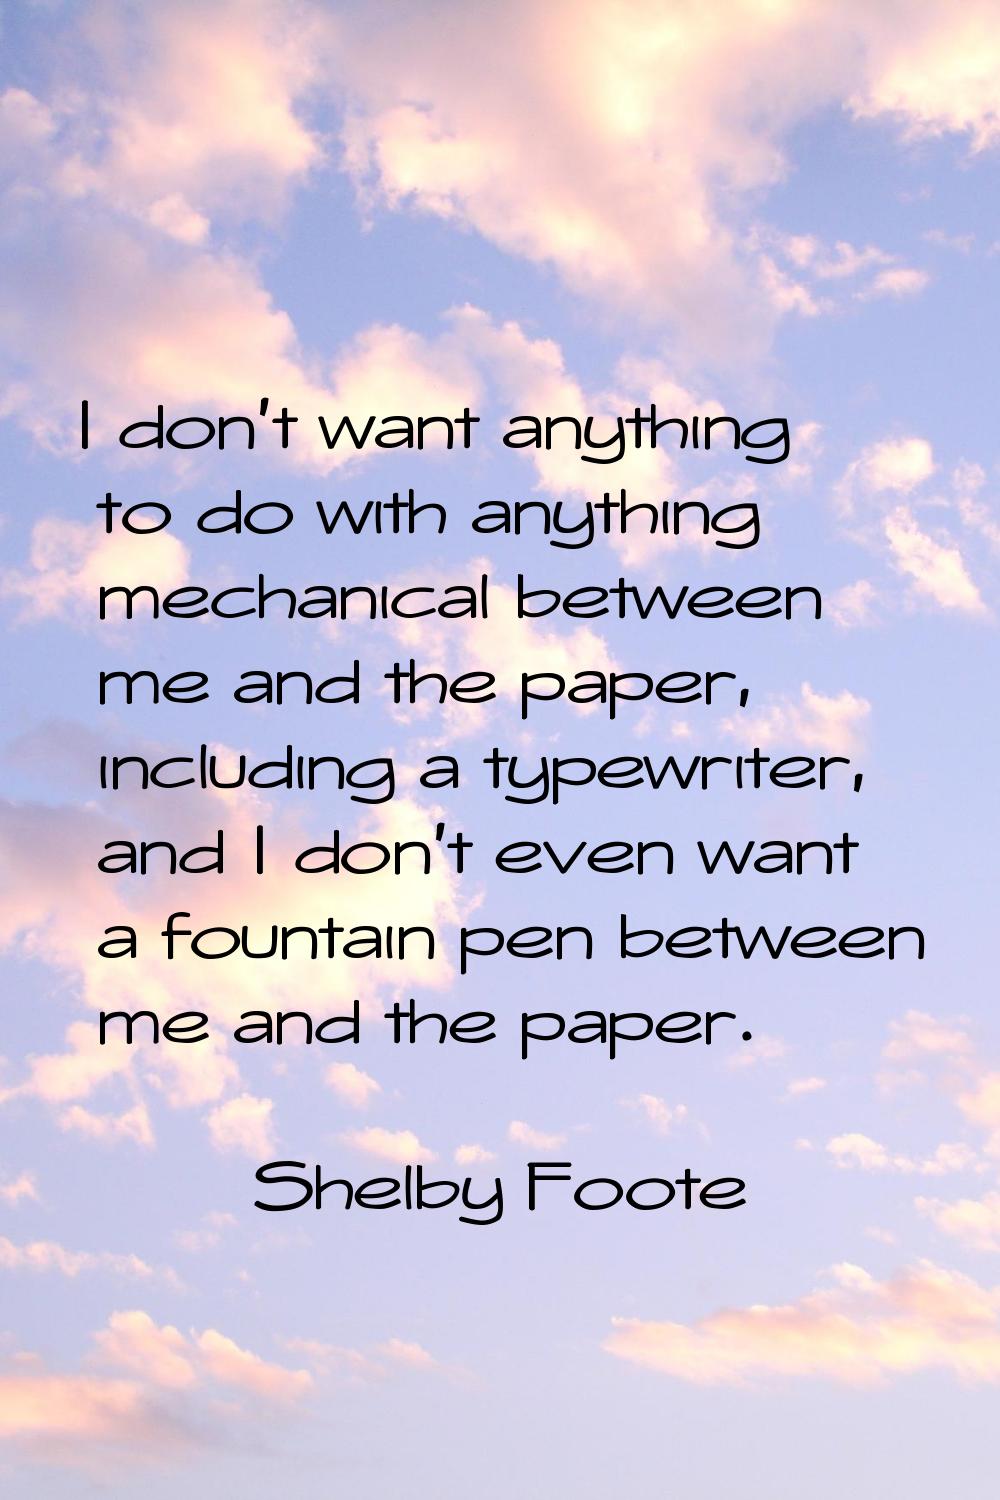 I don't want anything to do with anything mechanical between me and the paper, including a typewrit